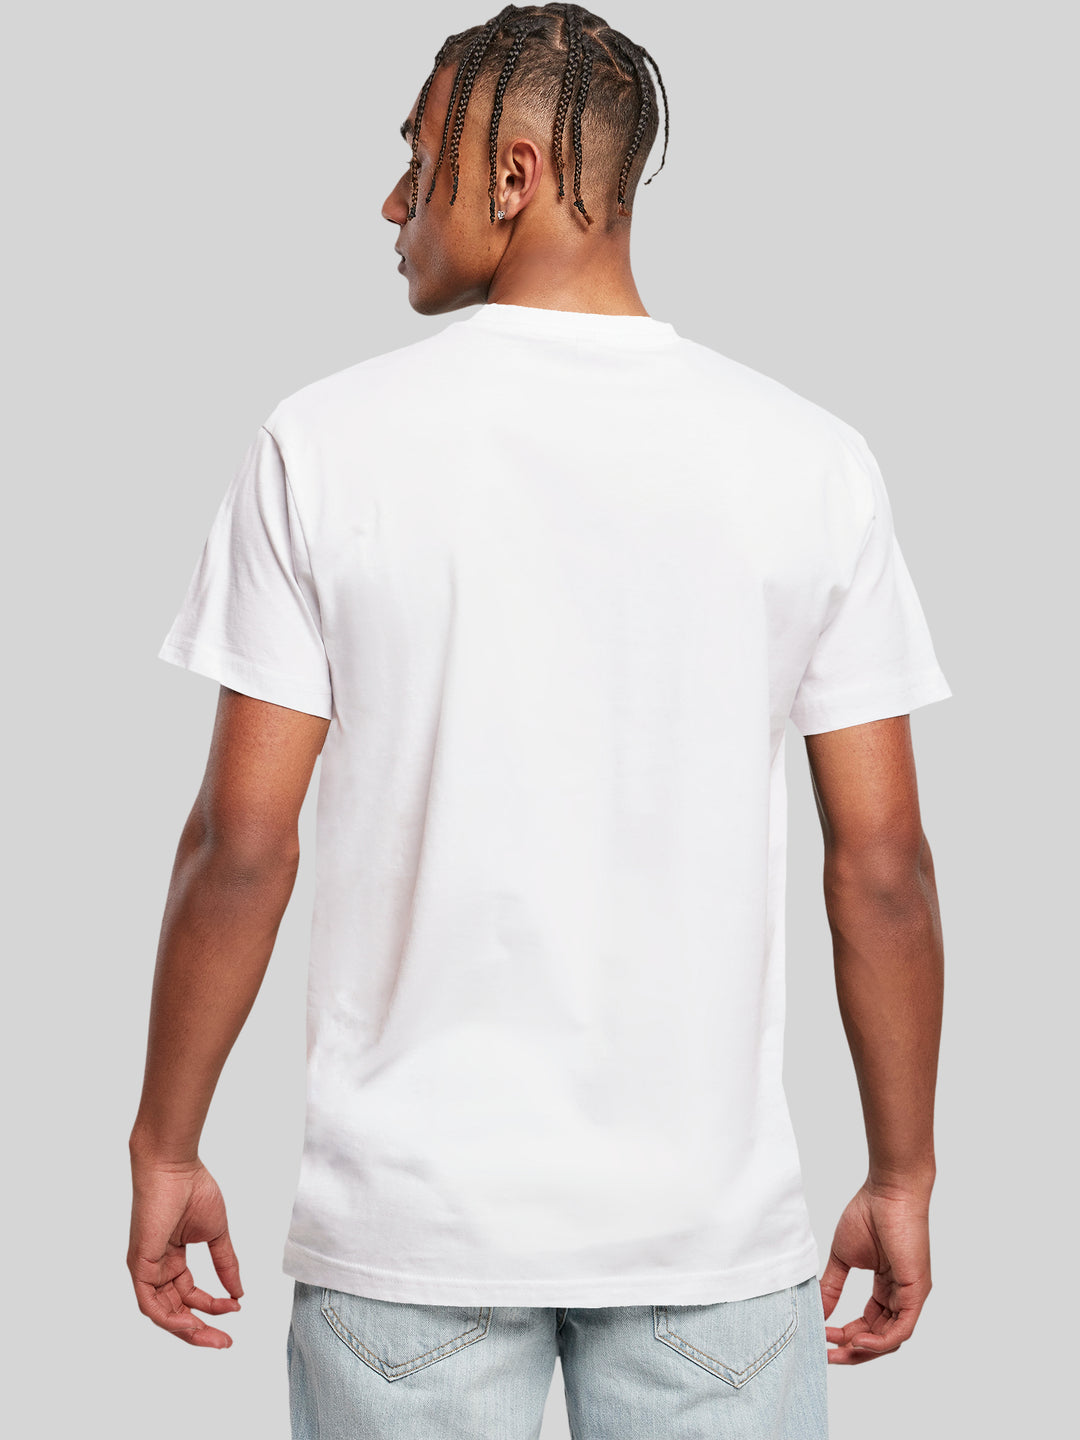 ALLES ATZE with T-Shirt Round Neck